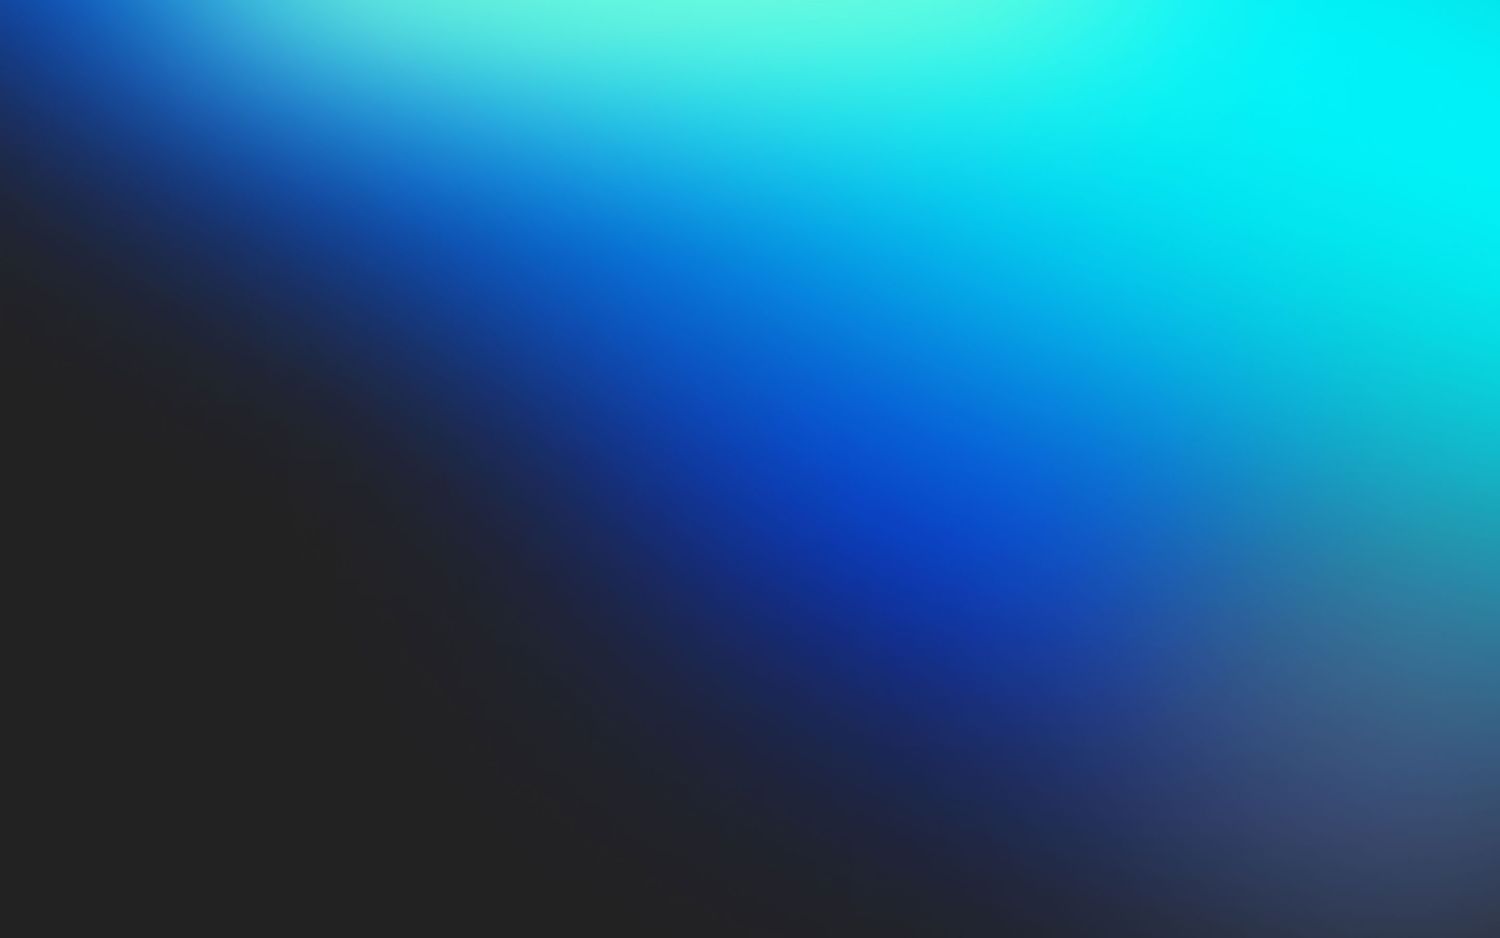 Blue and black gradient.